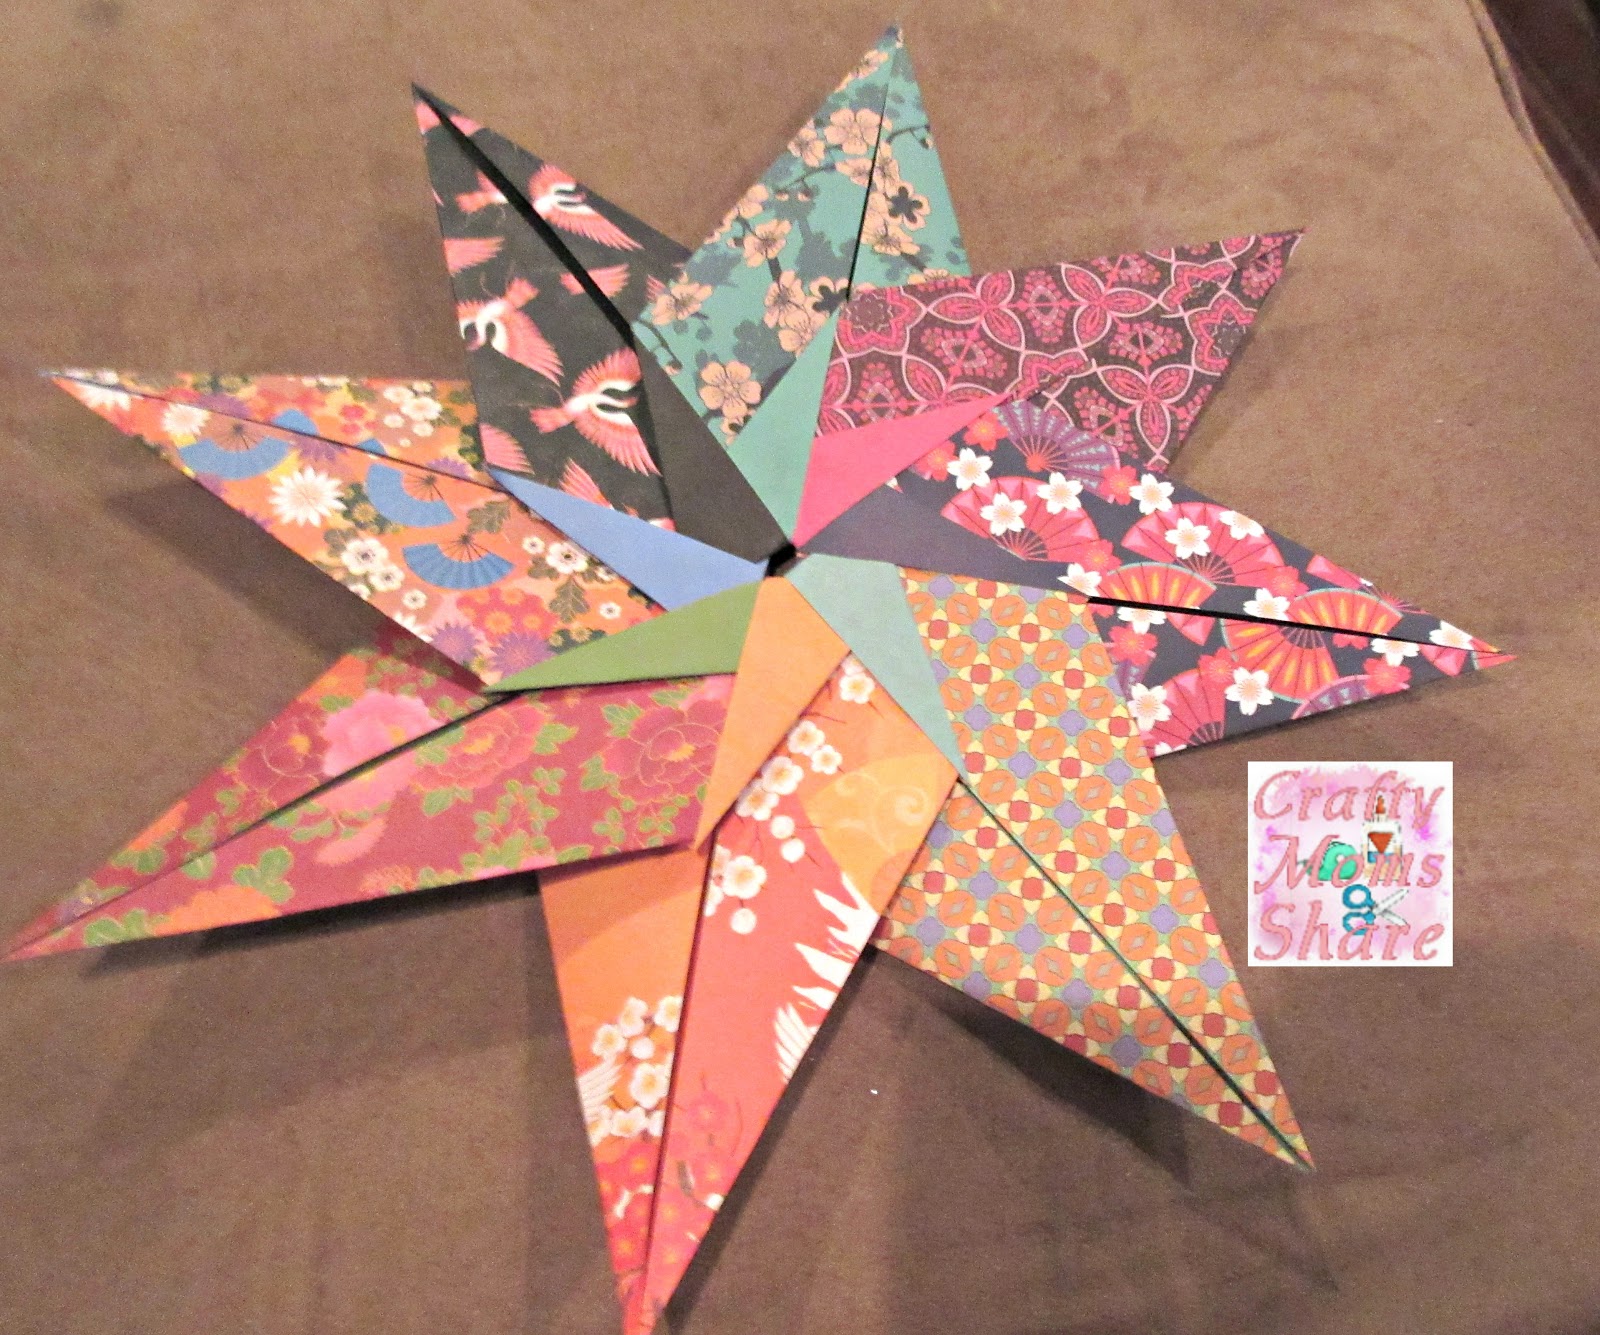 Crafty Moms Share: Origami Fun -- a Crafty Weekends Review & Link